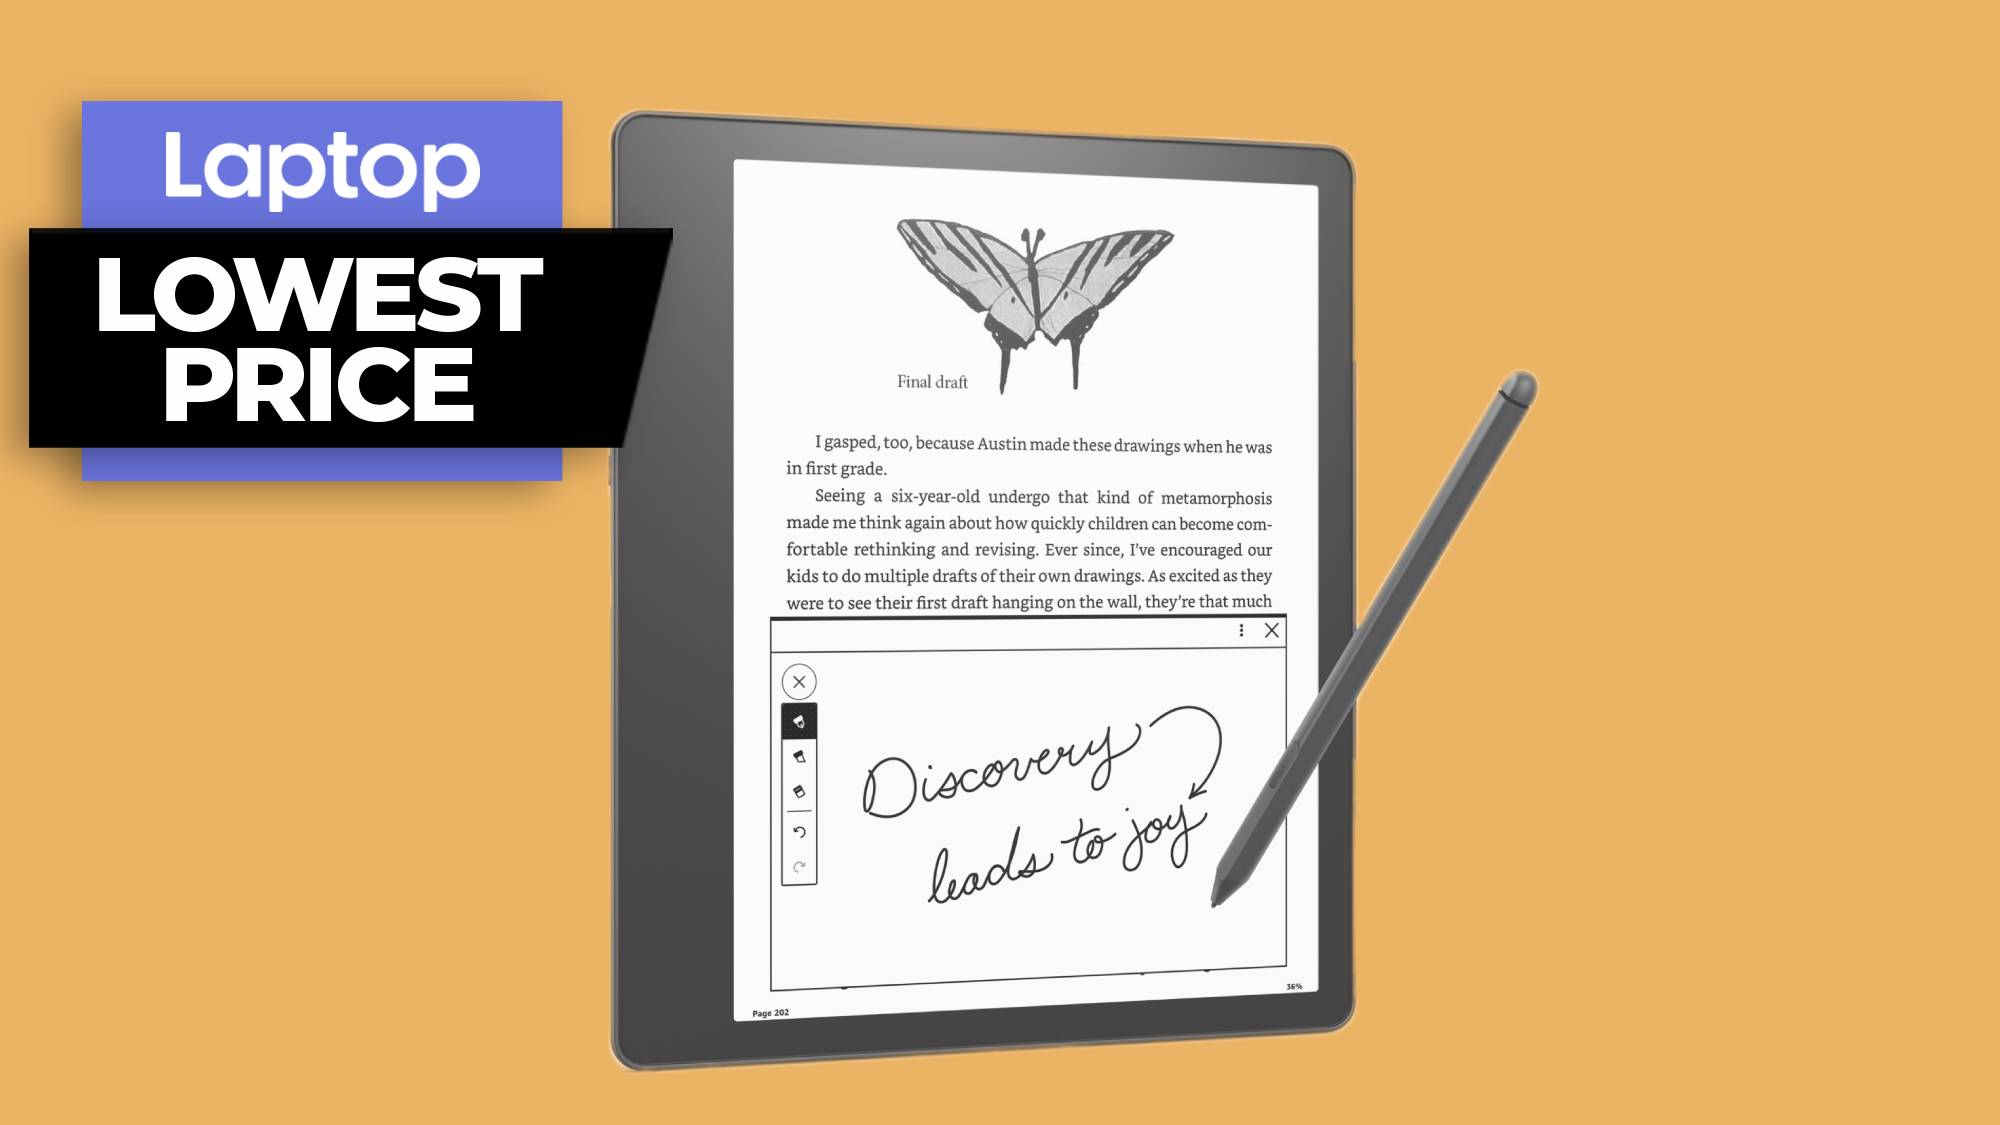 Kirkville - The Kindle Scribe Is Good for Reading, at a Cost